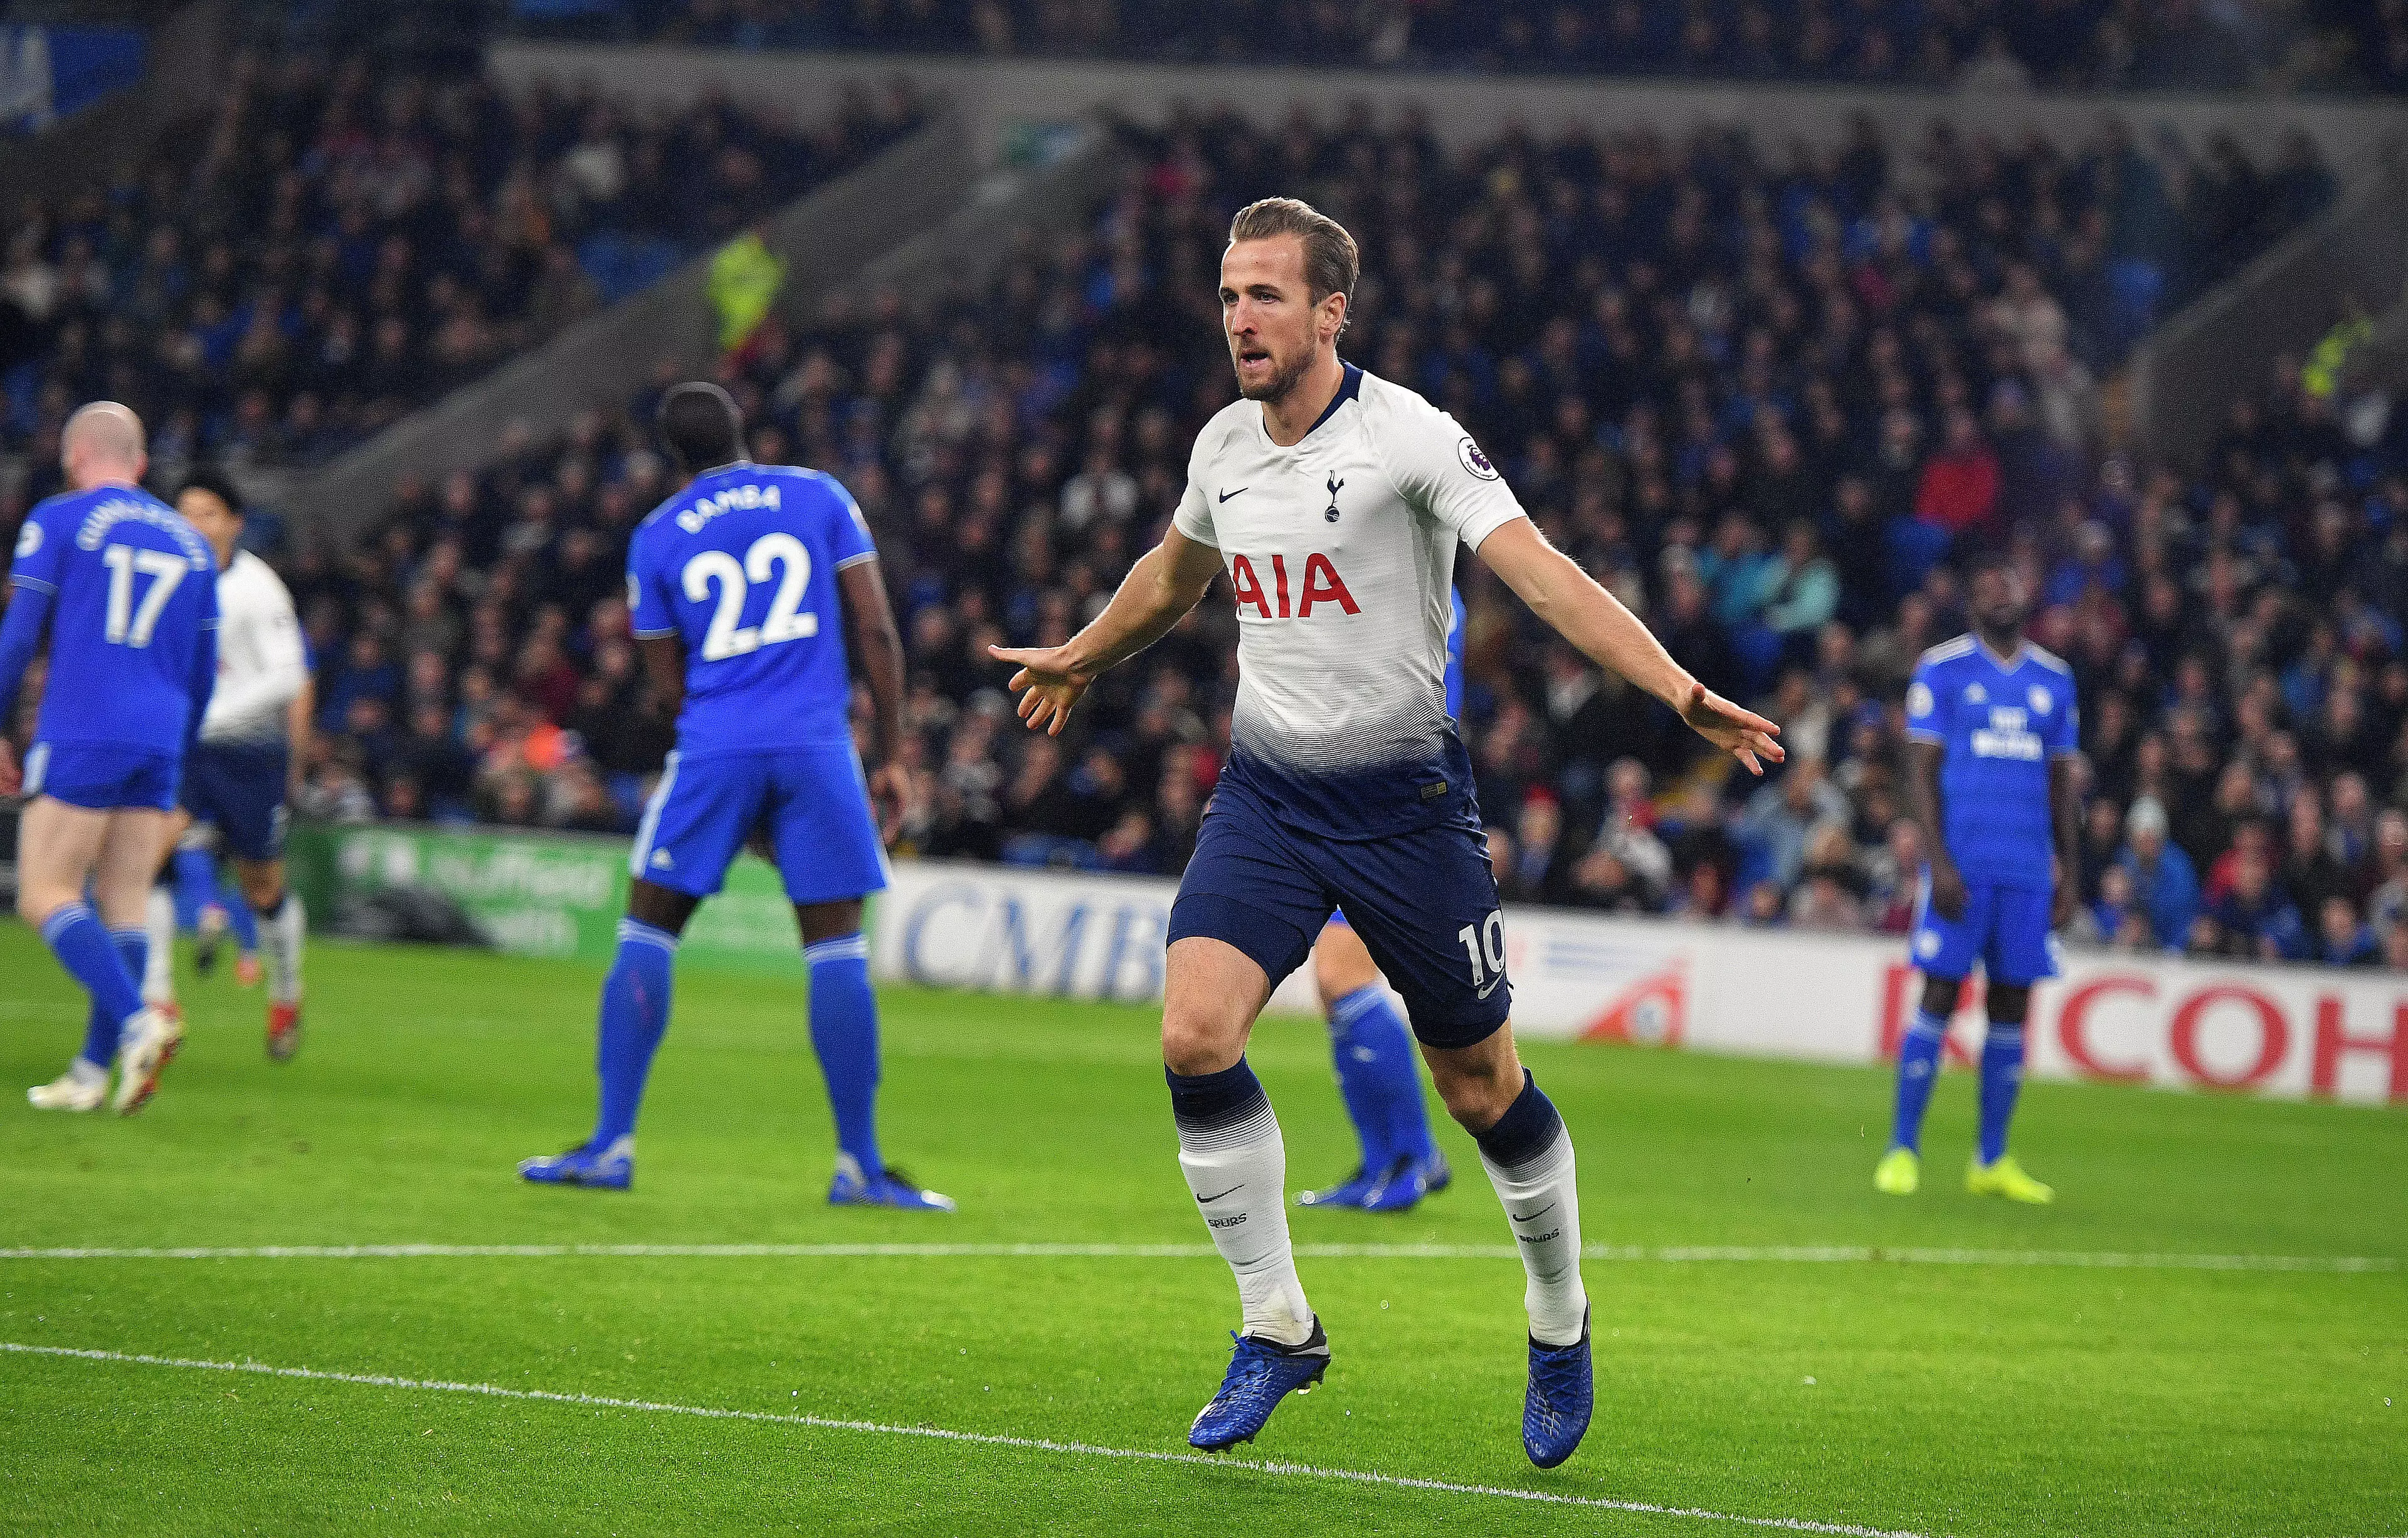 Kane has continued banging in the goals this season. Image: PA Images